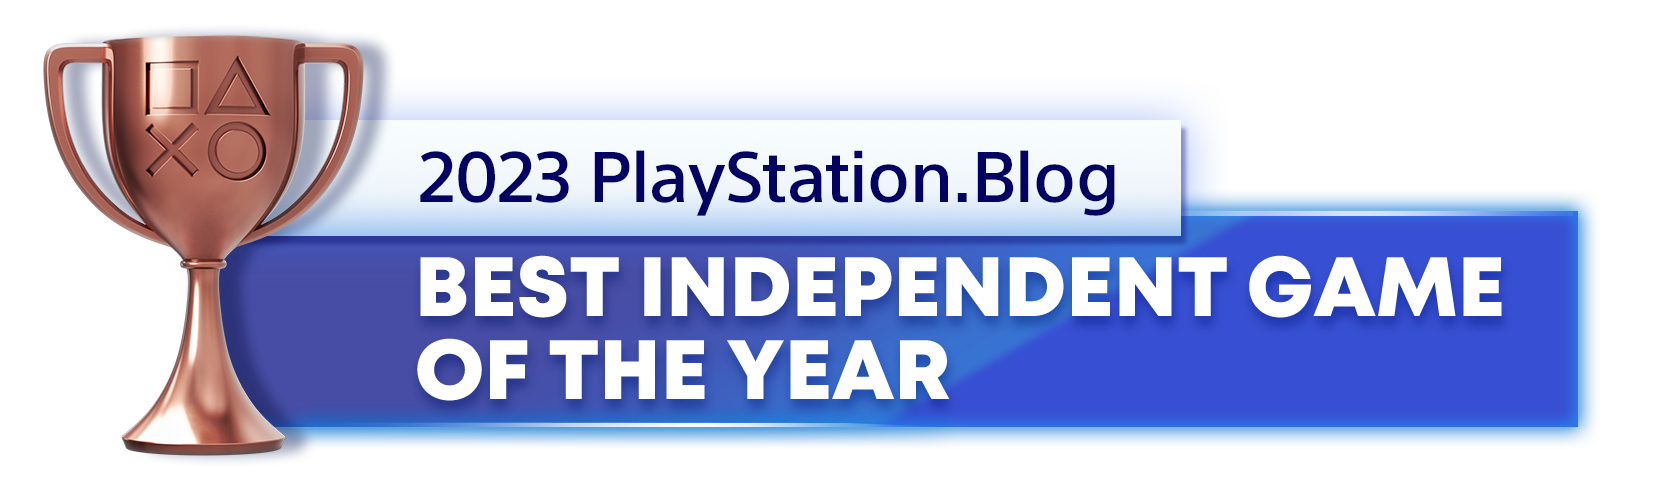  "Bronze Trophy for the 2023 PlayStation Blog Best Independent Game of the Year Winner"